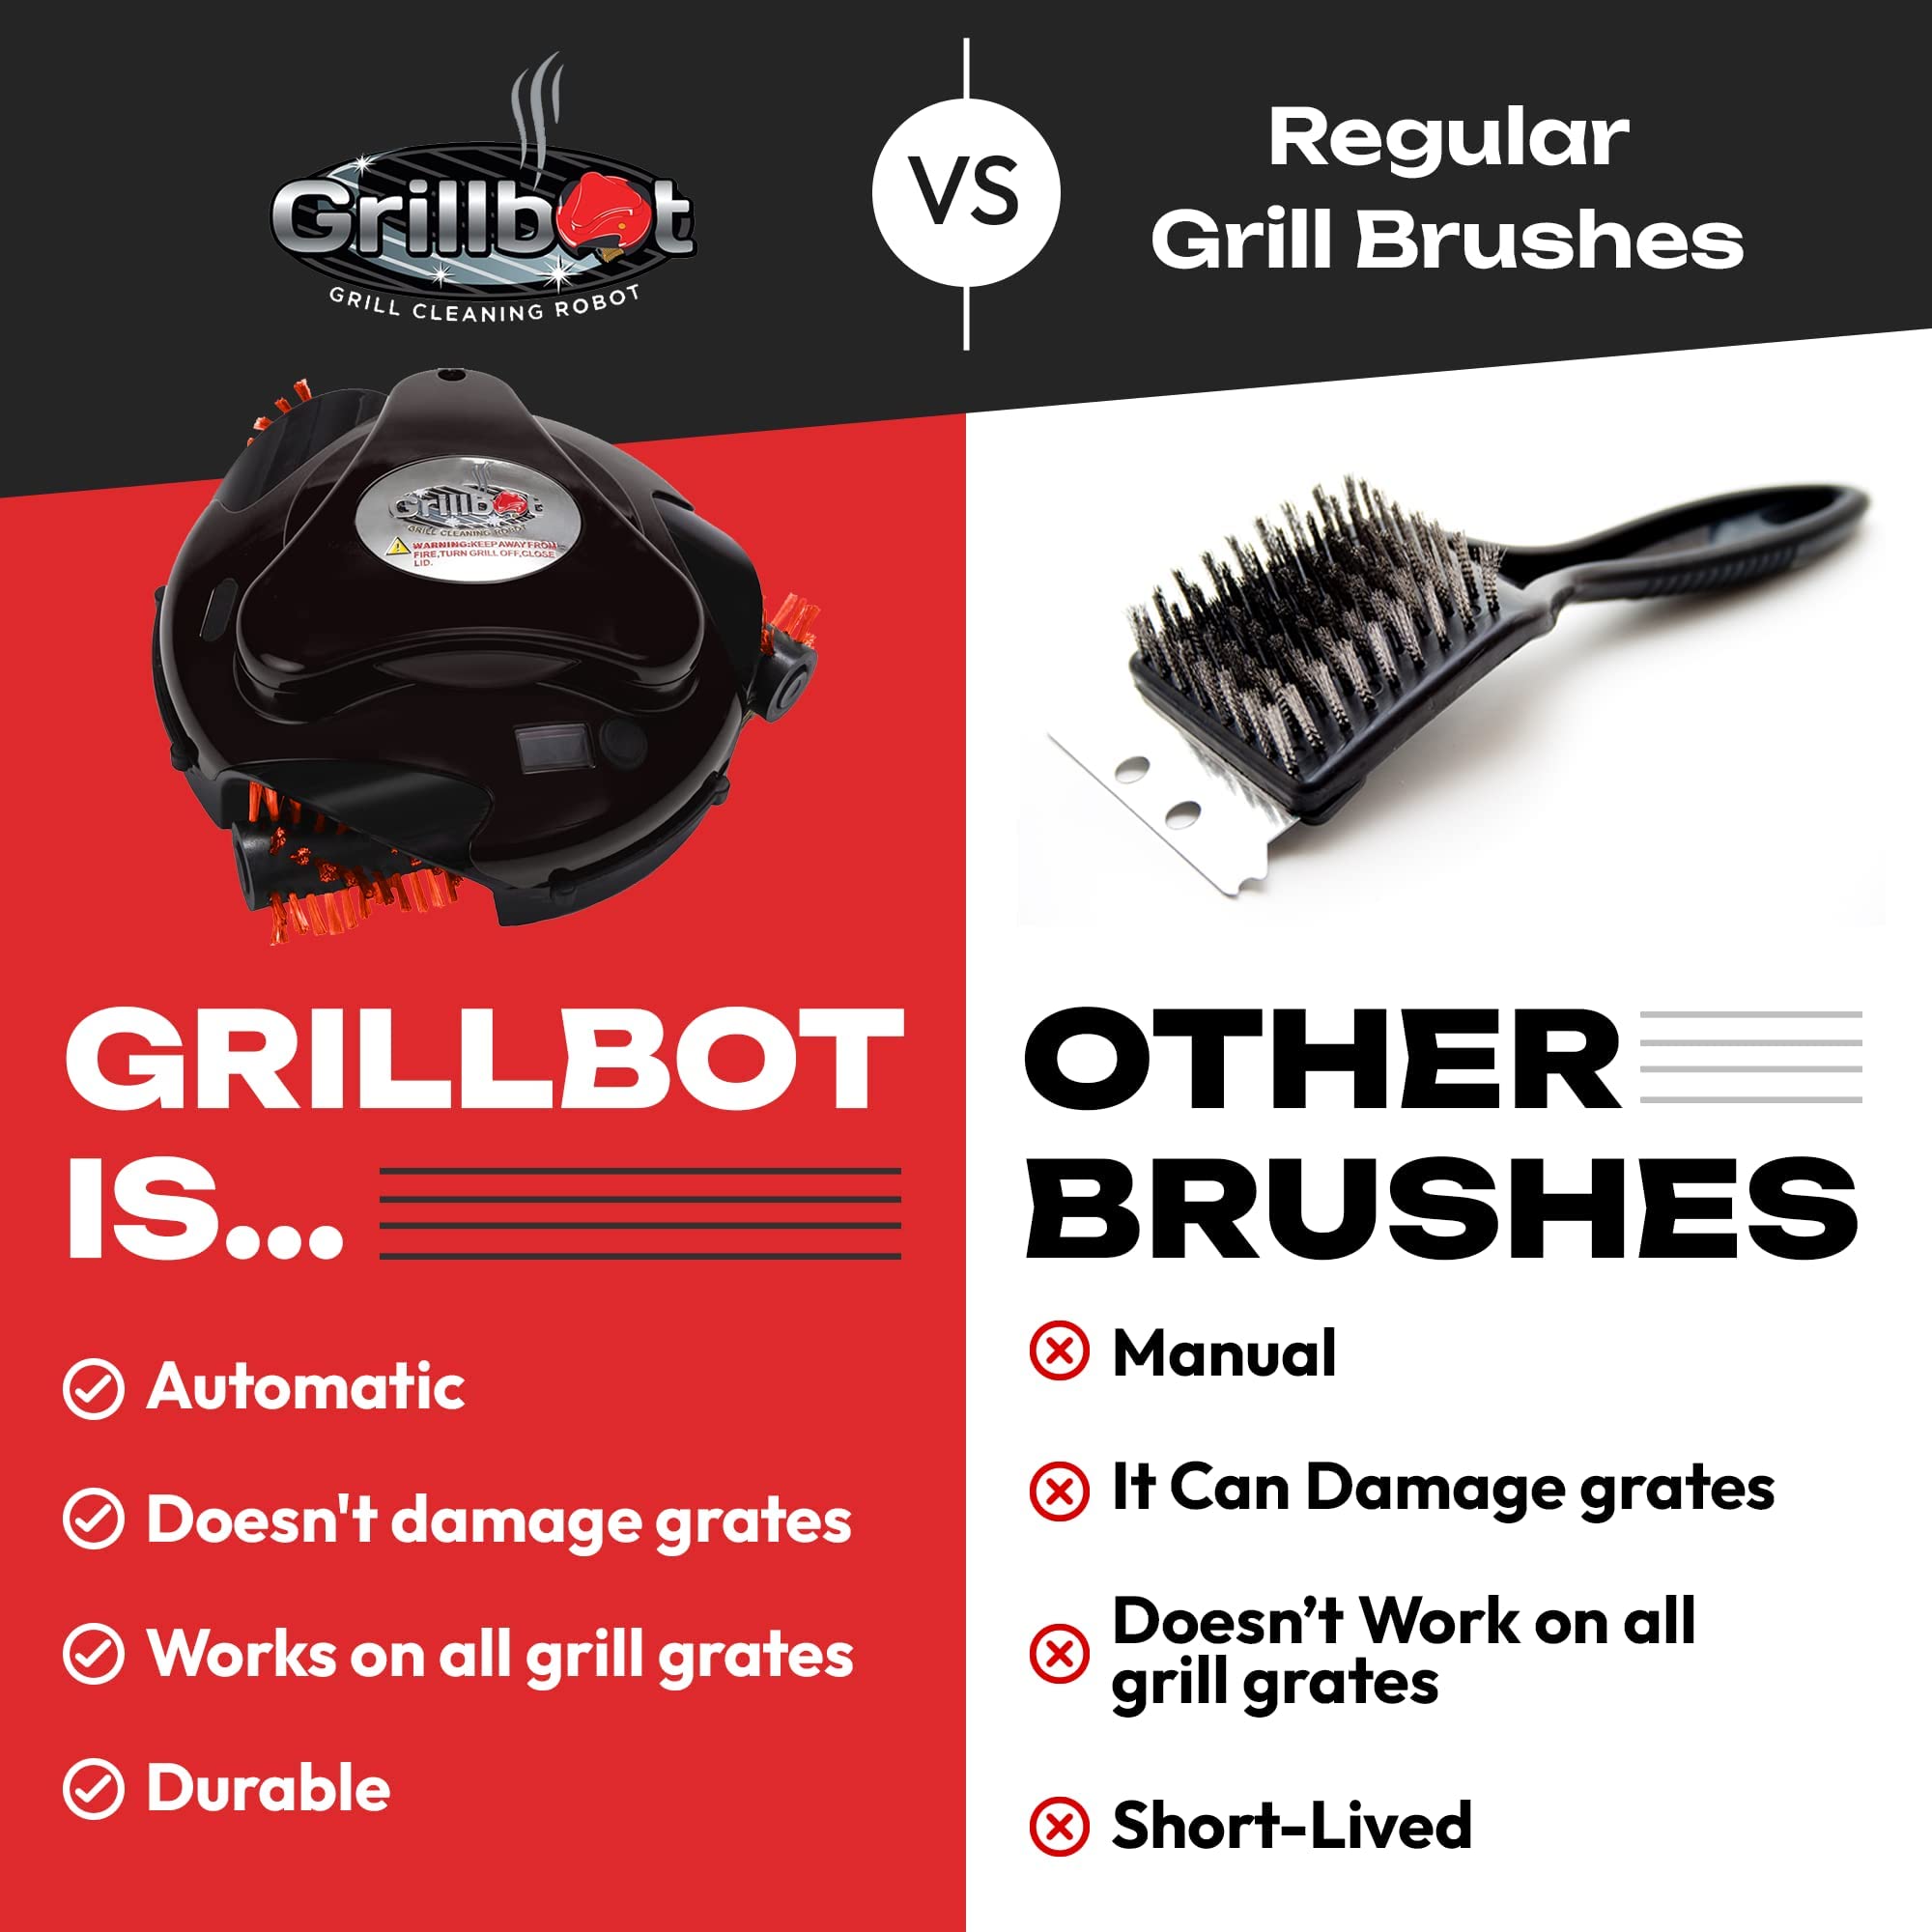 Grillbot Grill Cleaning Robot with BBQ Grill Cleaner and Grill Brushes - image 3 of 7